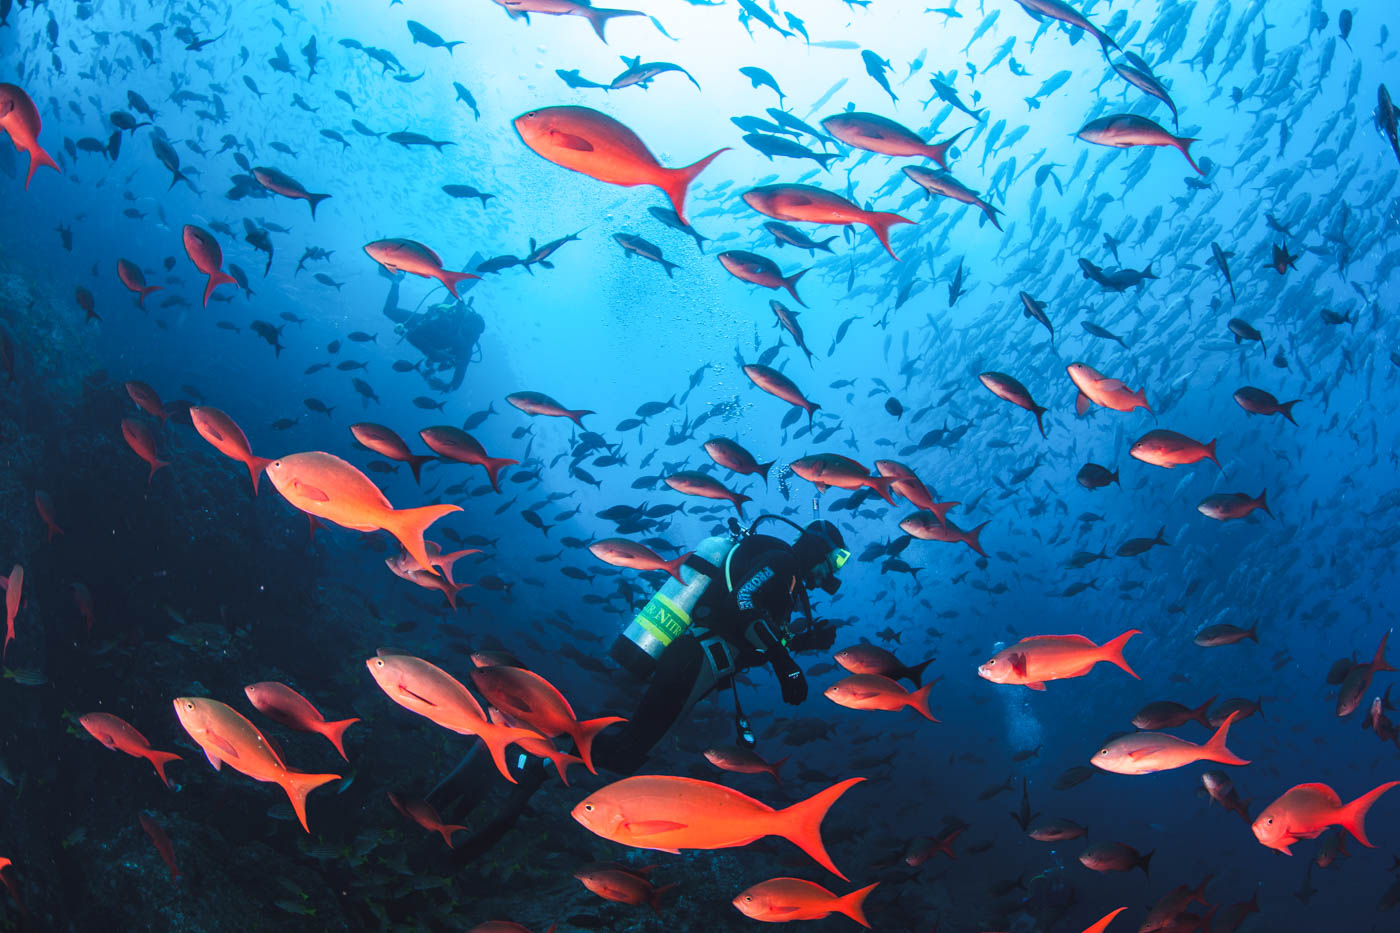 A scuba diver under the ocean surrounded by a school of bright orange tropical fish.